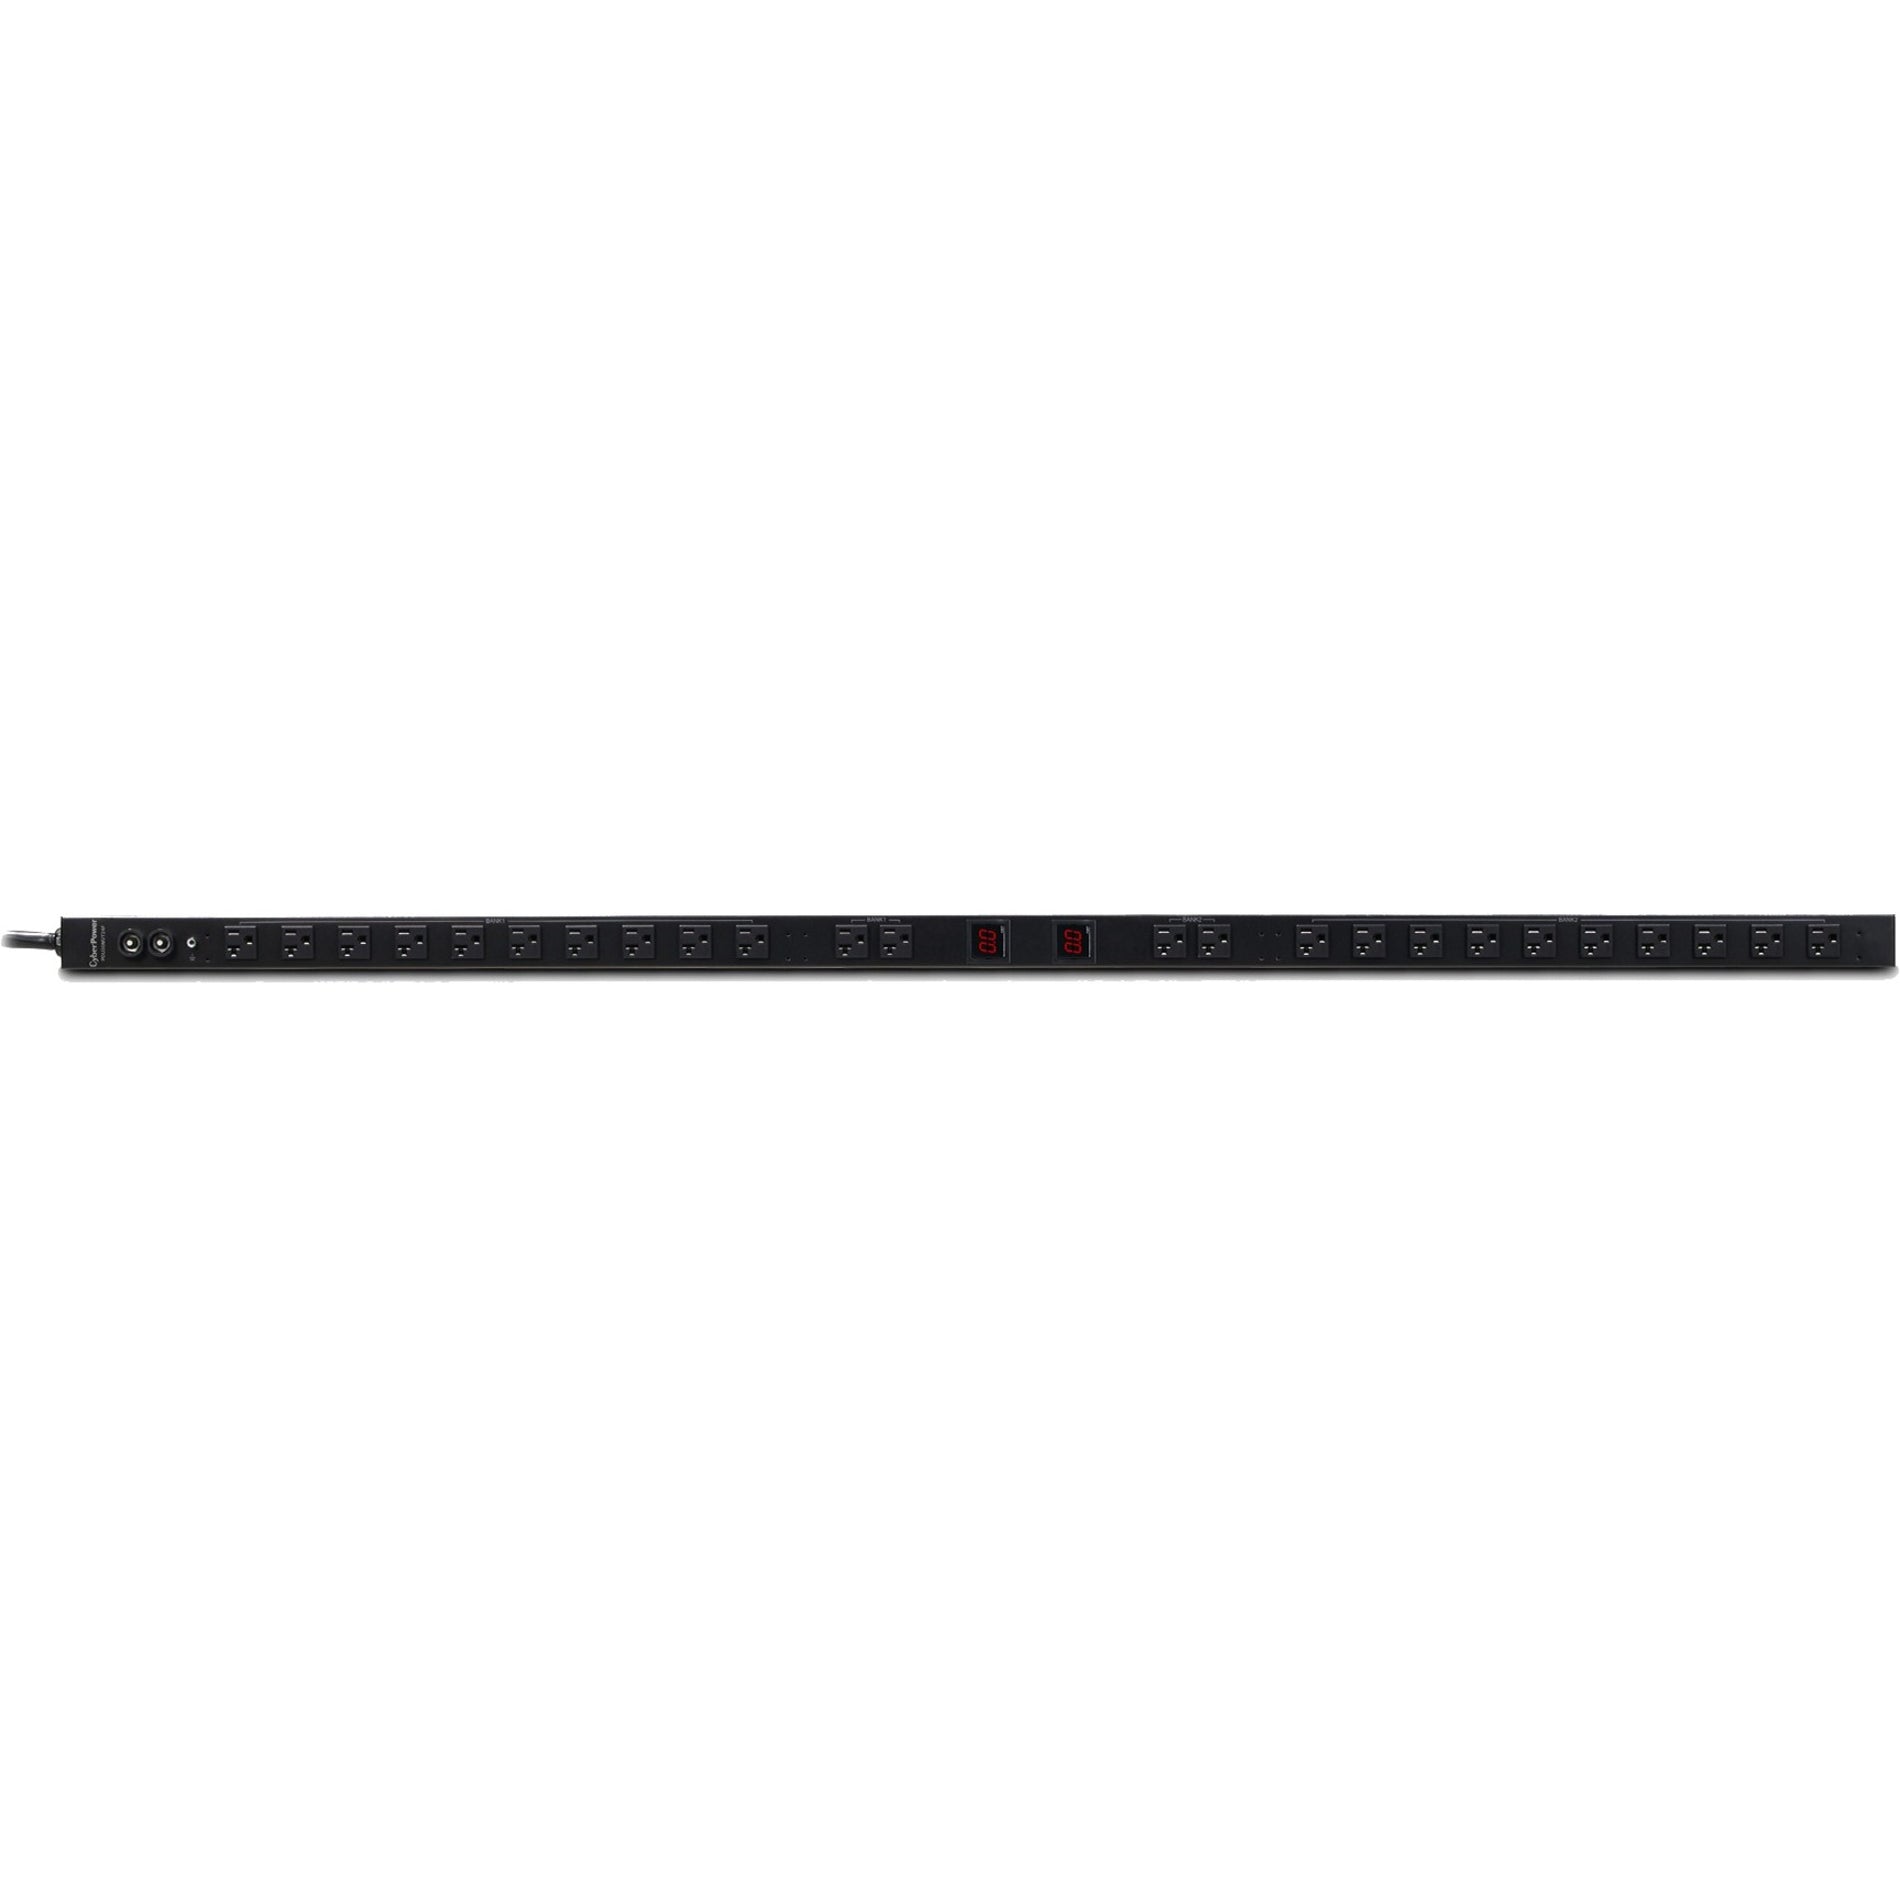 CyberPower PDU30MVT24F Metered PDU, 24-Outlets, 30A, 120V AC, Wall/Rack-Mountable